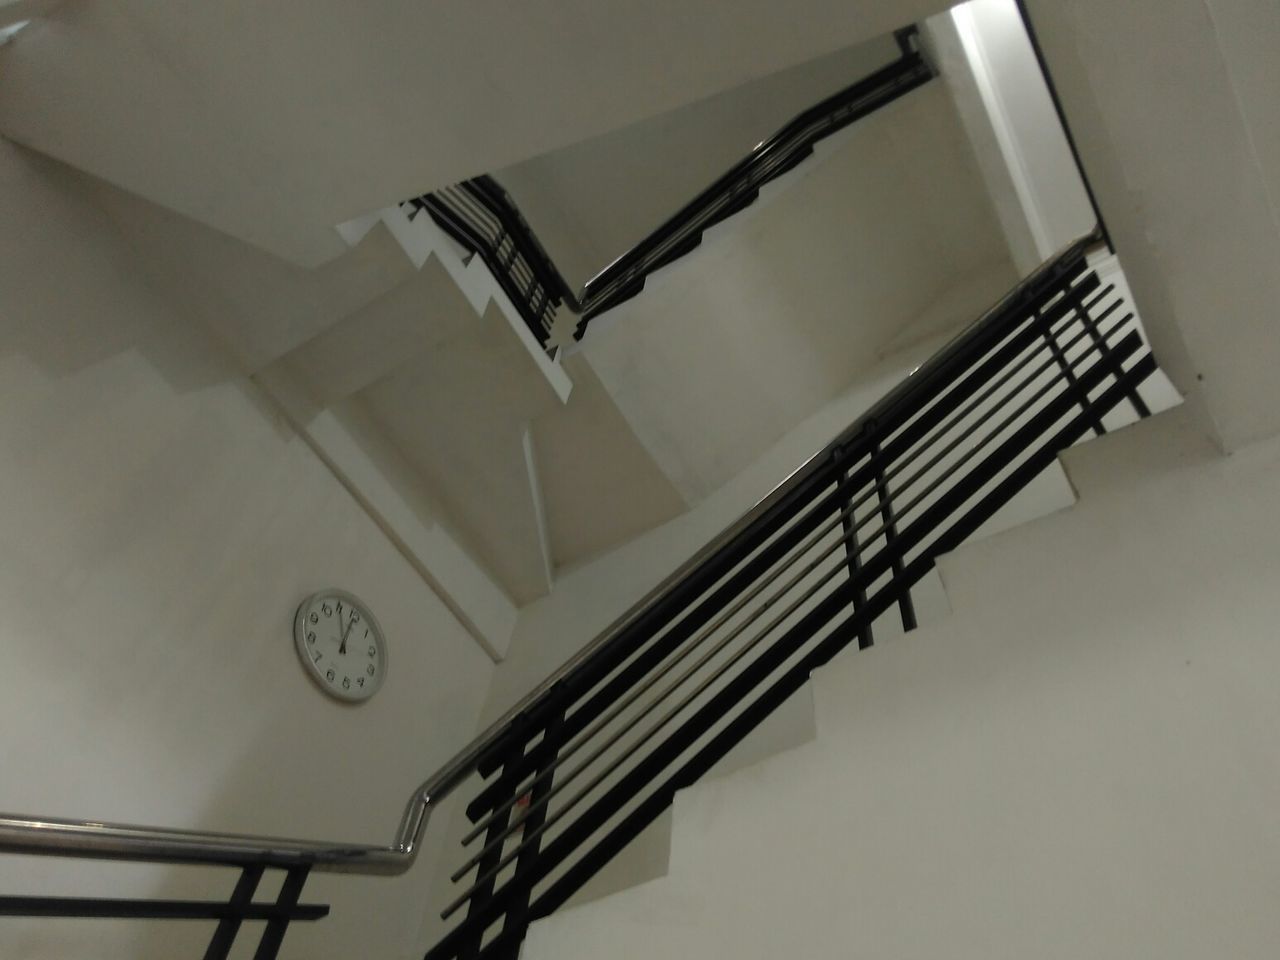 VIEW OF STAIRCASE